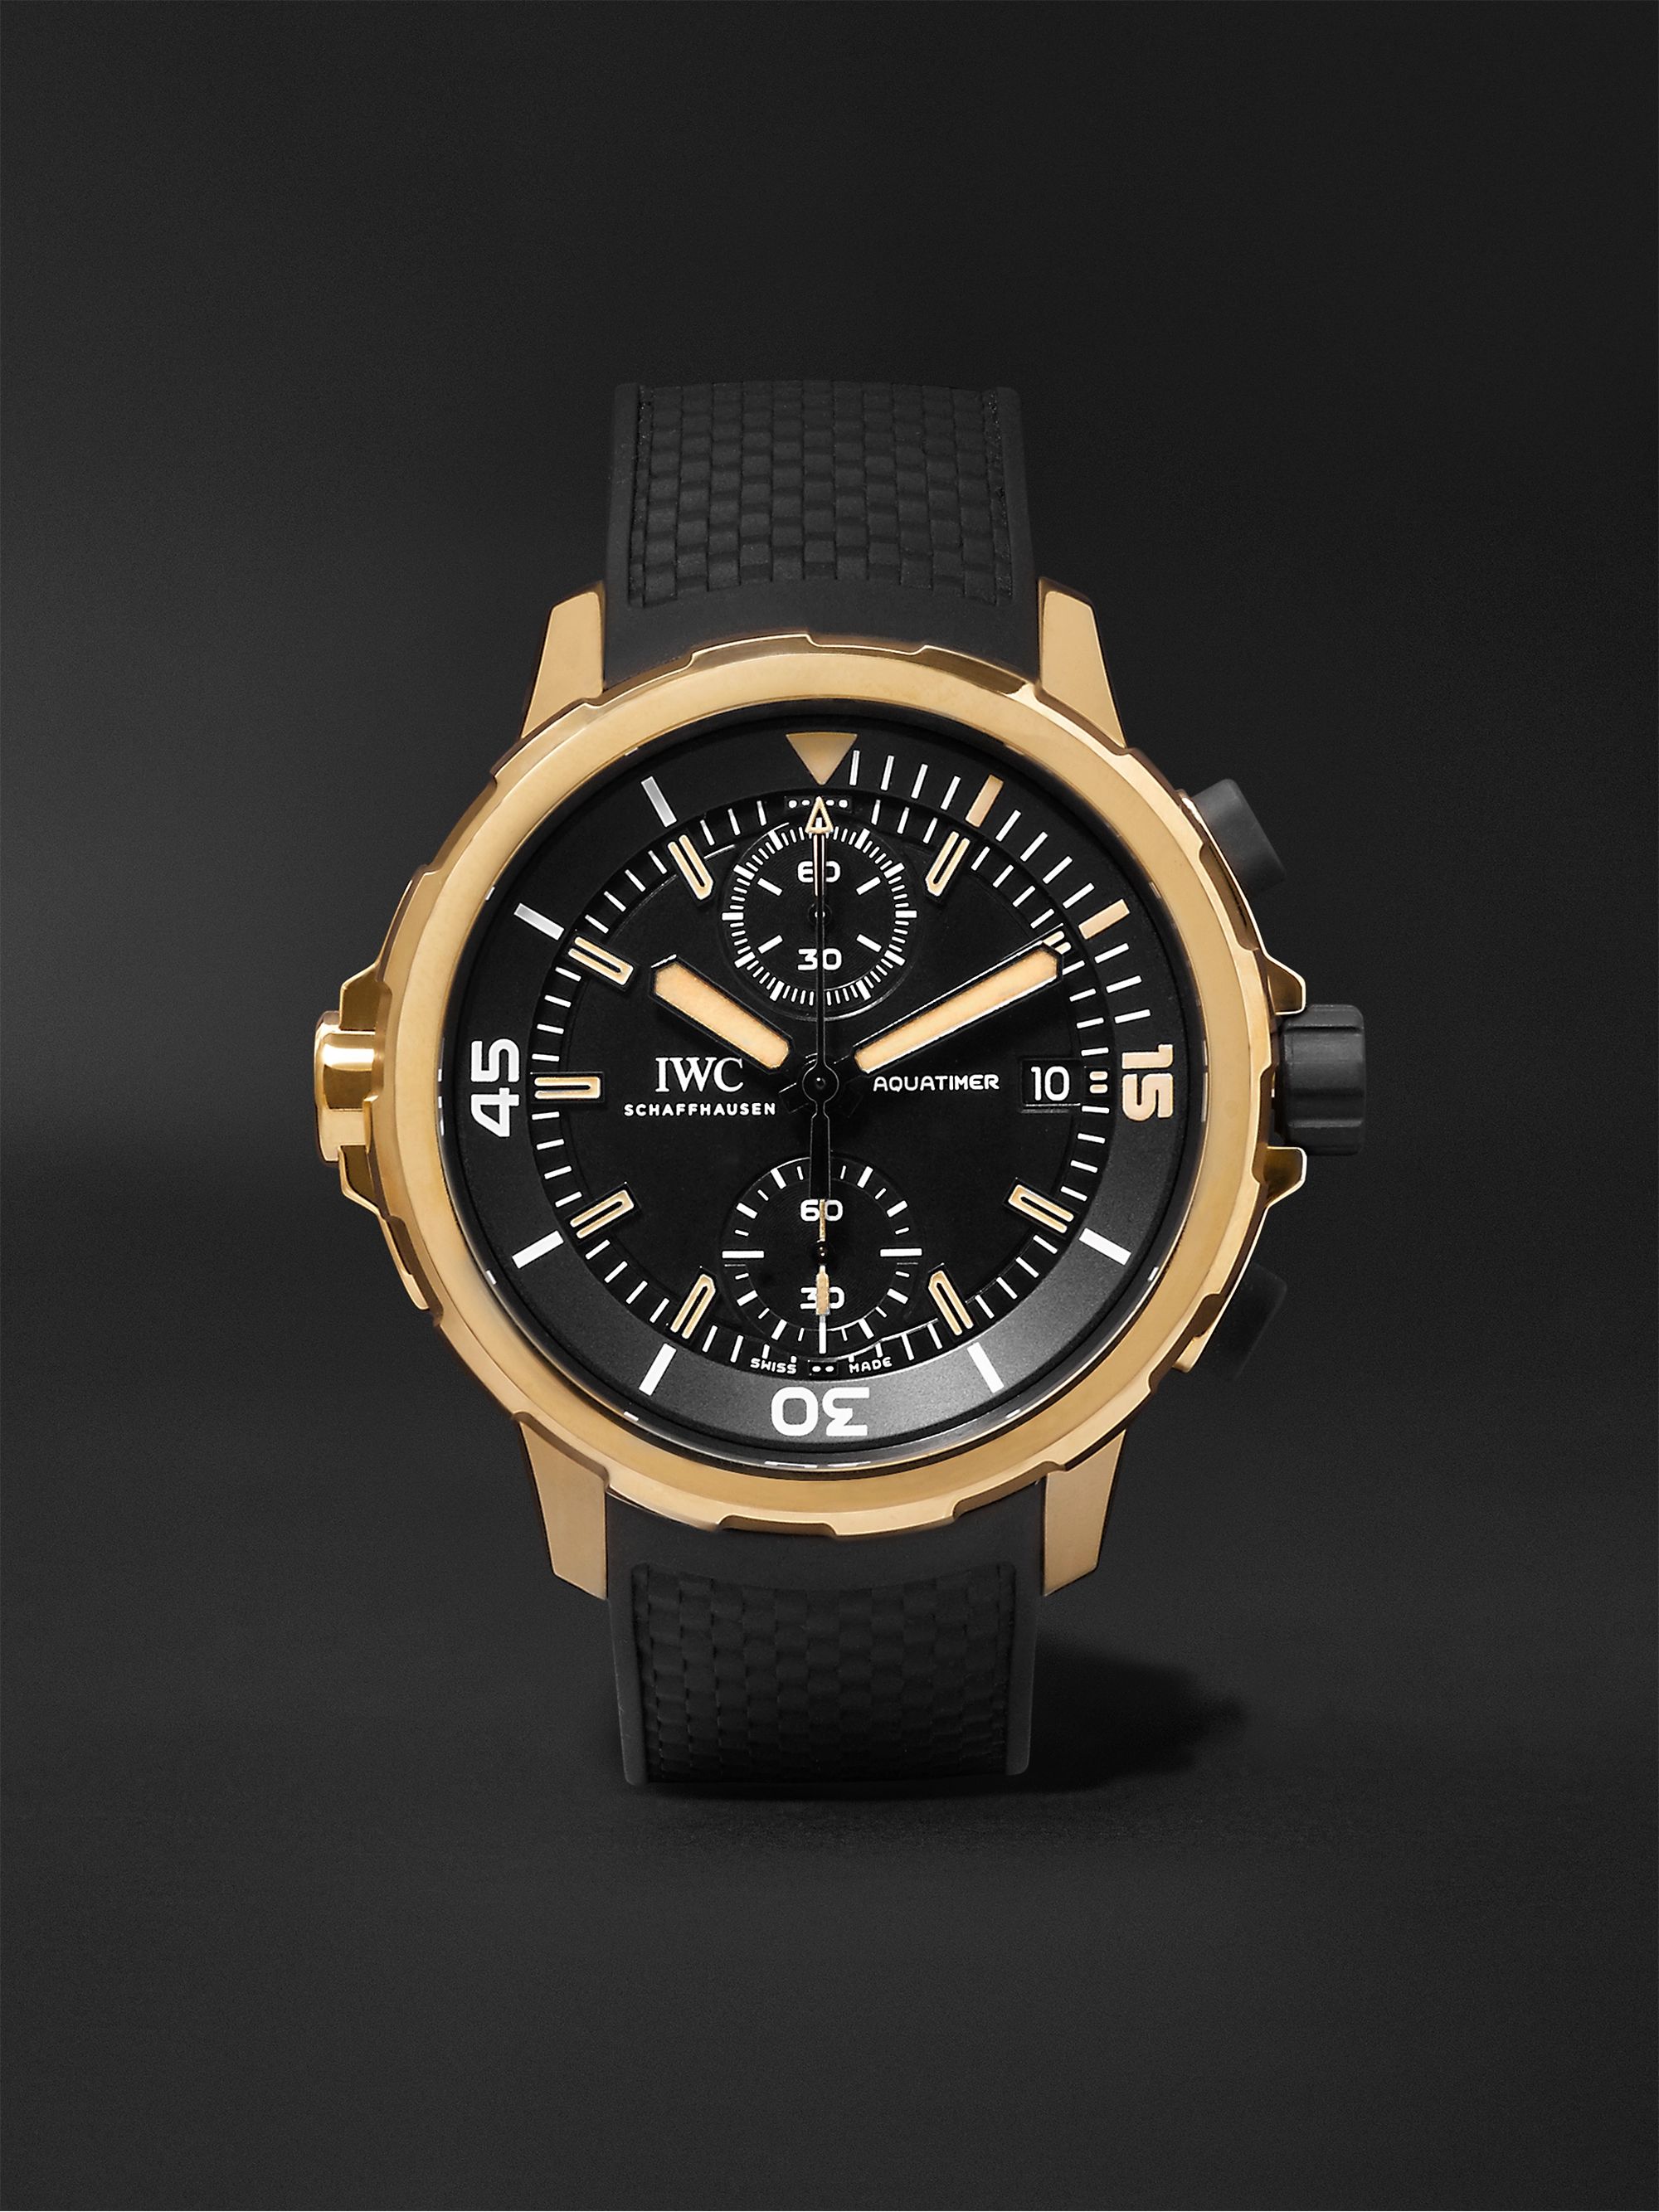 IWC SCHAFFHAUSEN Aquatimer Expedition Charles Darwin Automatic Chronograph 44mm Bronze and Rubber Watch, Ref. No. IW379503